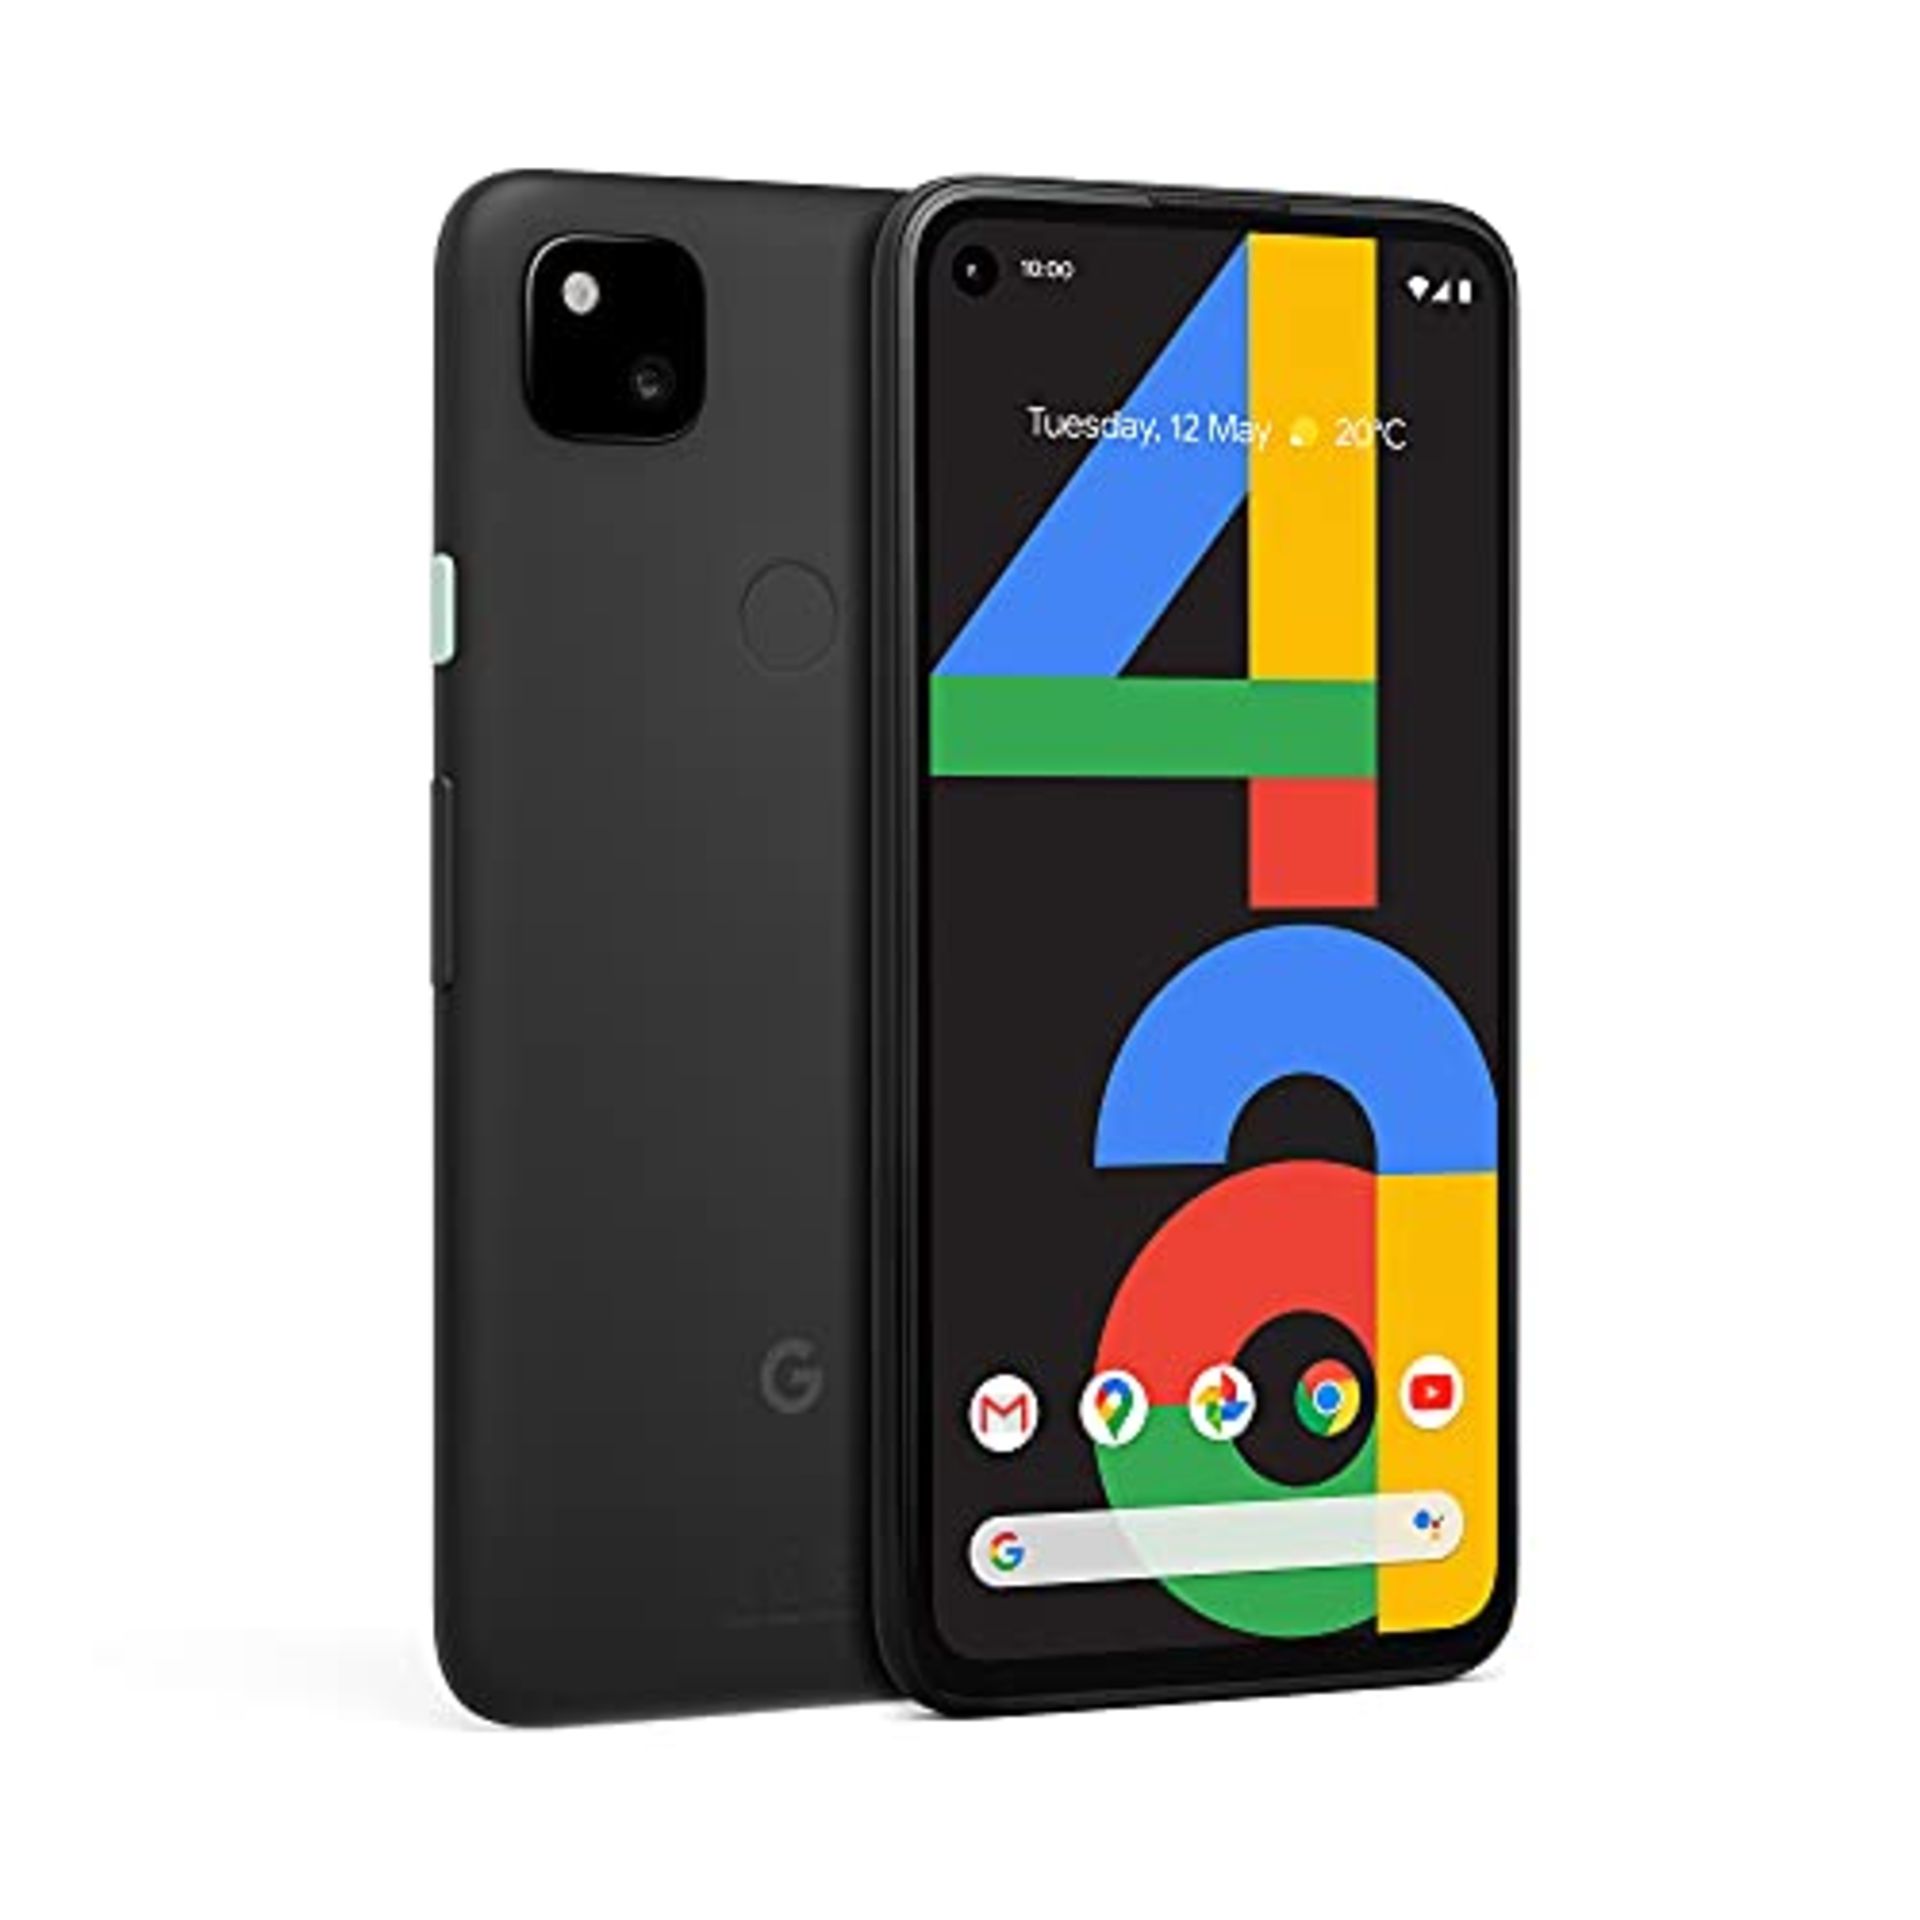 RRP £349.00 [Cracked] Google Pixel 4a Android Mobile Phone- Black, 128GB, 24 hour battery, Nightsi